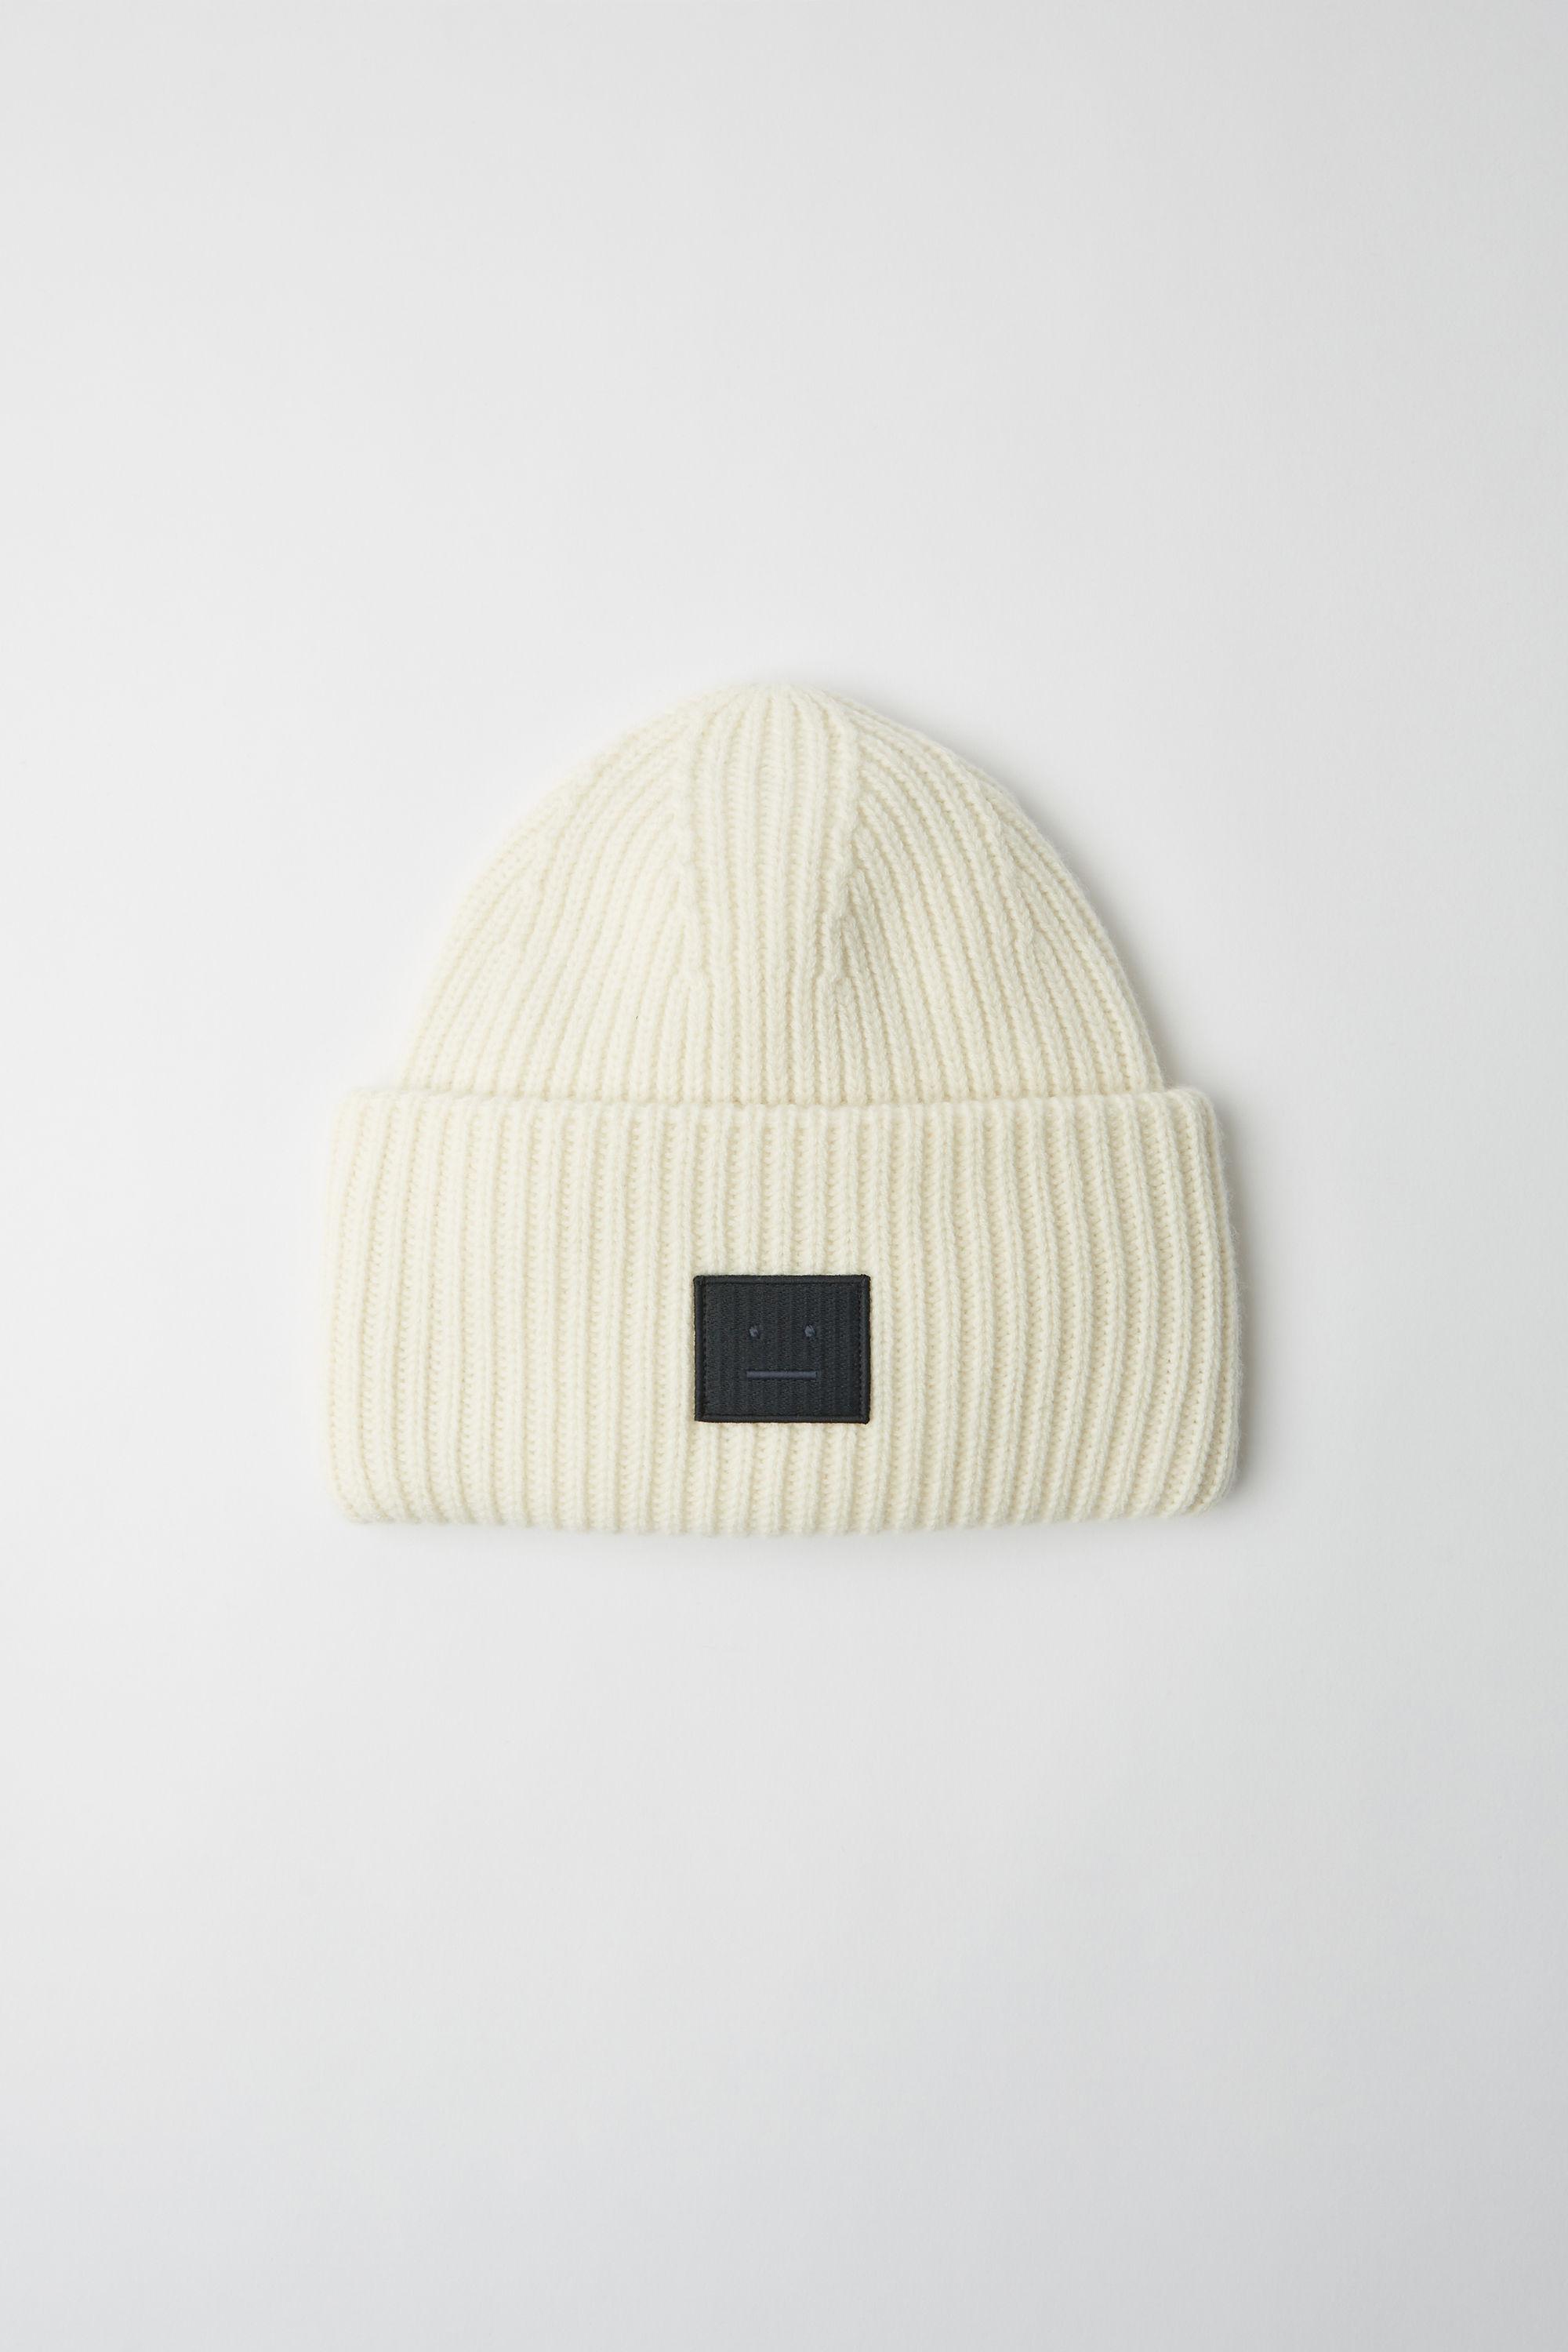 Acne Studios Wool Fa-ux-hats000024 White/black Face-patch Beanie - Lyst